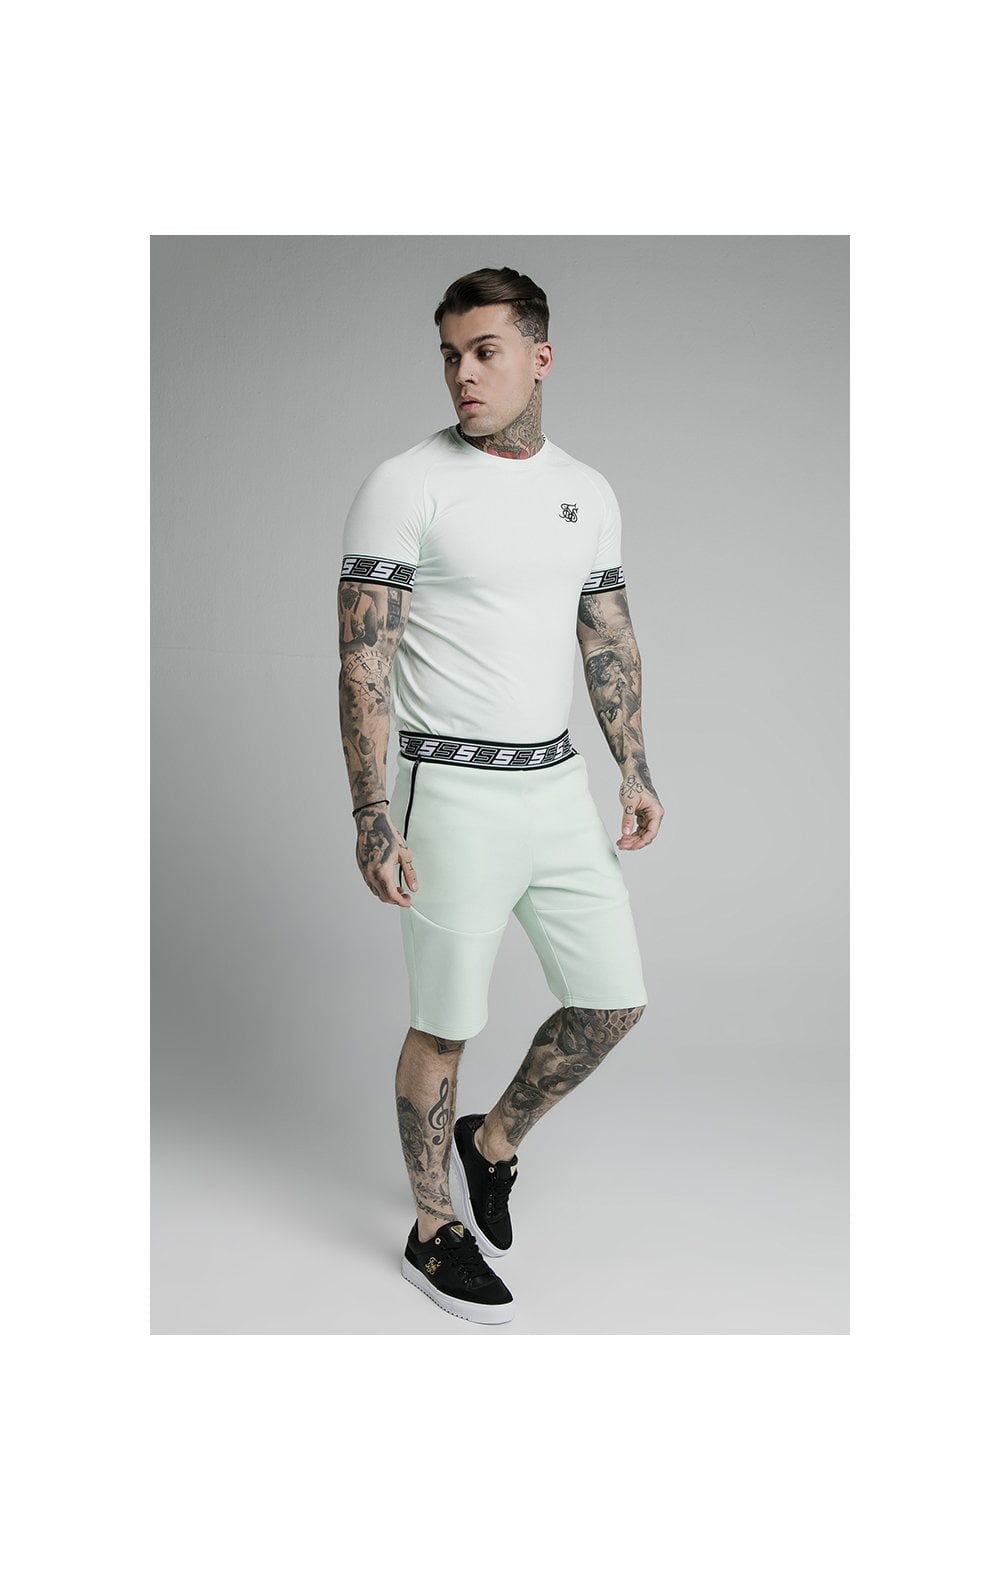 Load image into Gallery viewer, SikSilk S/S Exhibit Tech Tee - Aqua Teal (5)